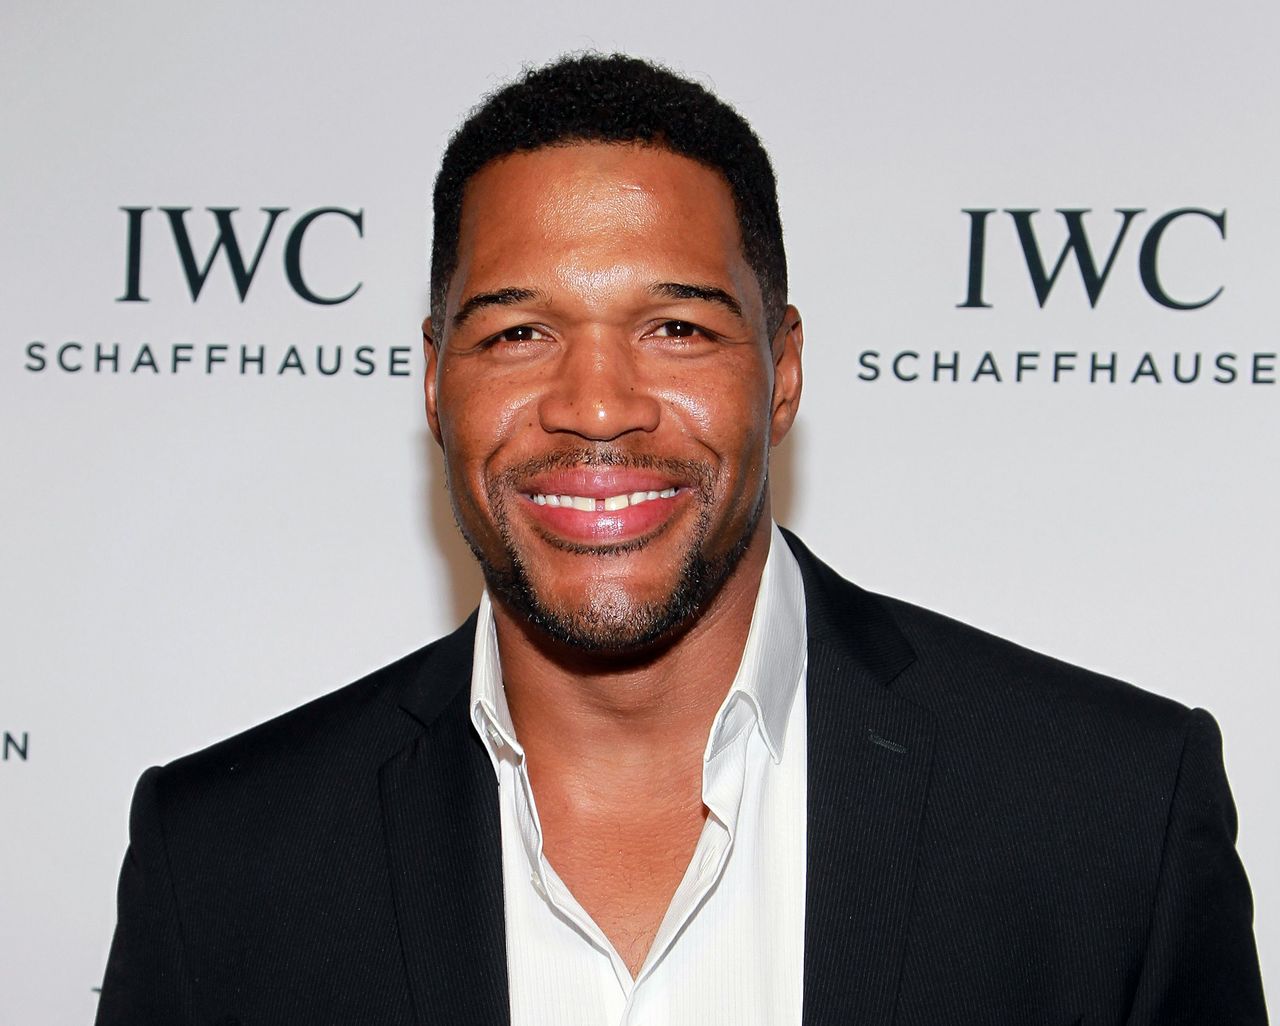 Michael Strahan is leaving “Live! With Kelly and Michael,” the daily talk show he co-hosts with Kelly Ripa, to work full-time on “Good Morning America.” ABC said Tuesday.